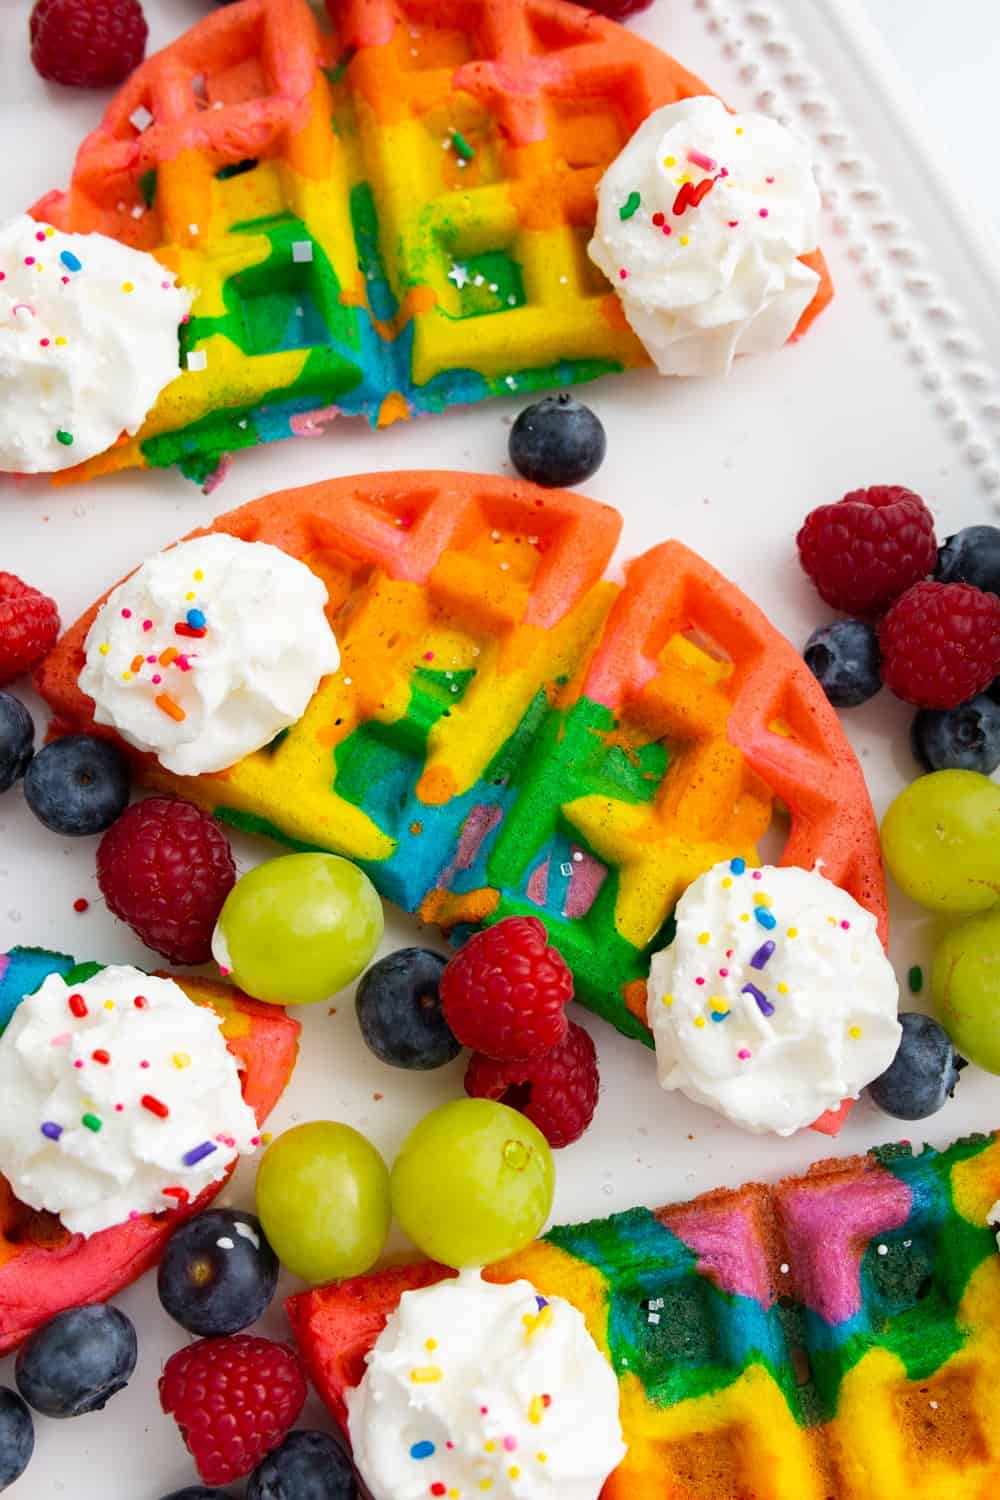 Breakfast Just Got More Magical With Rainbow Waffles!